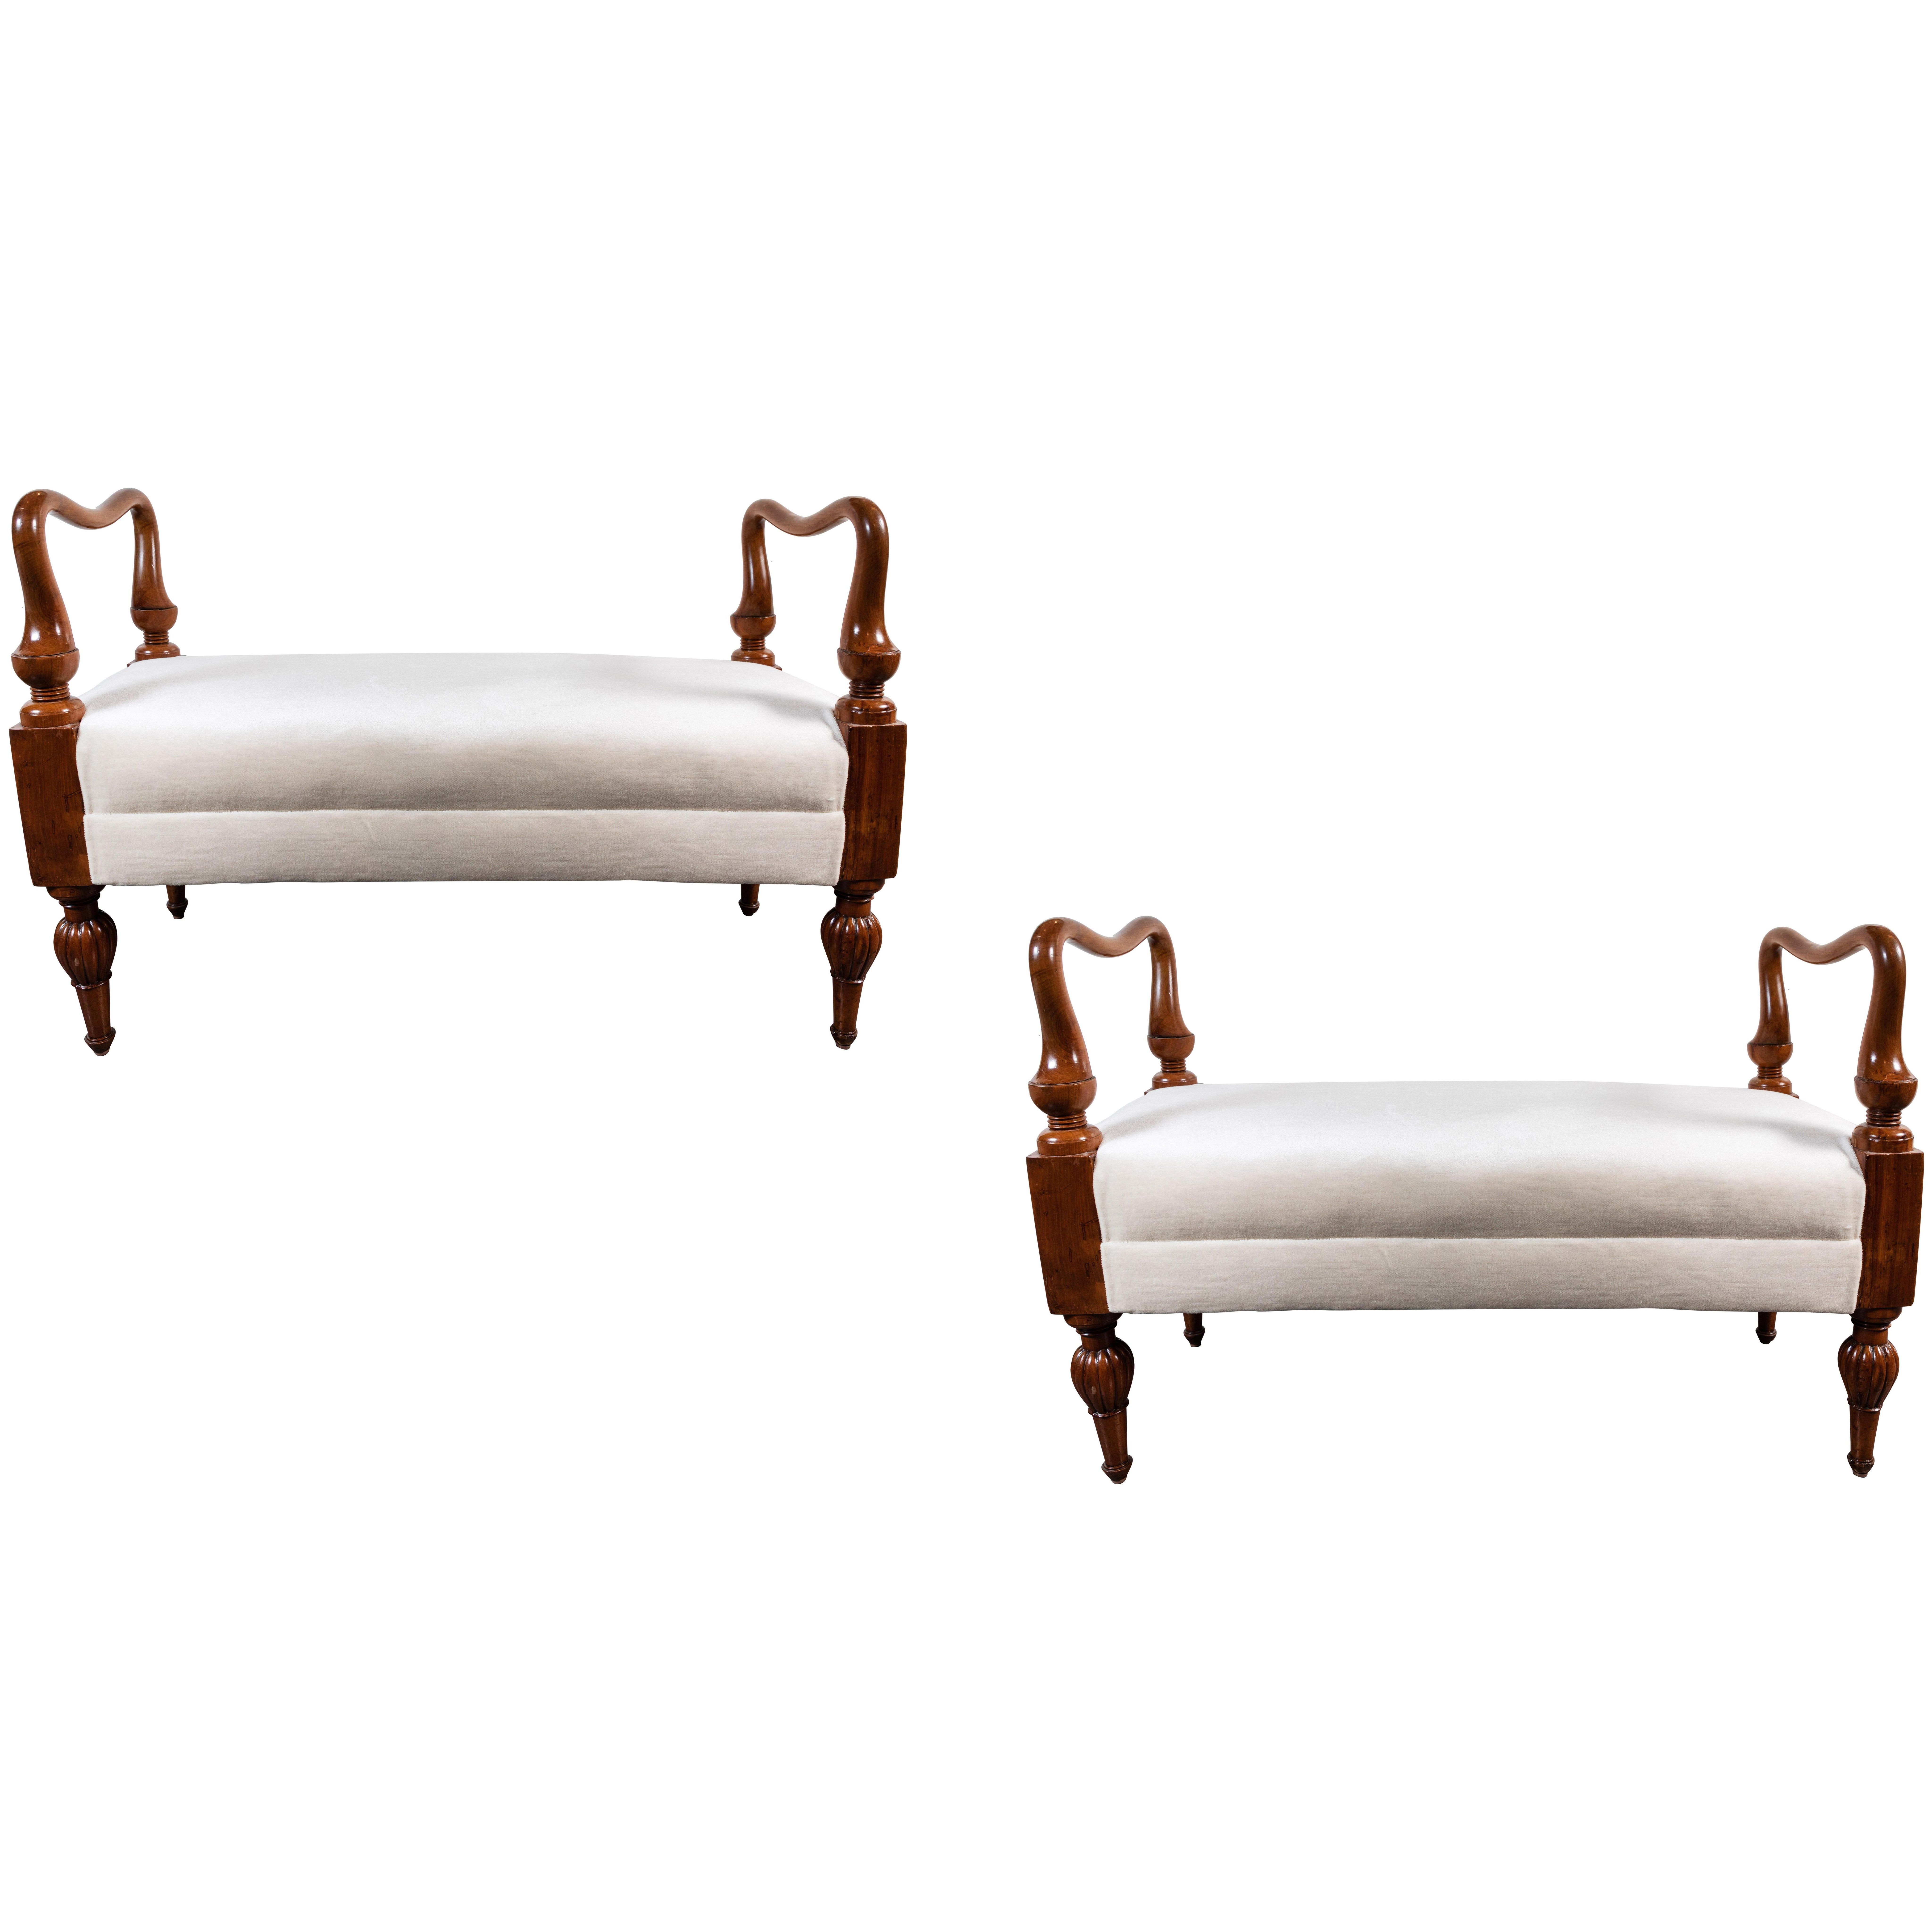 Elegant, Early 1900s Biedermeier Benches For Sale